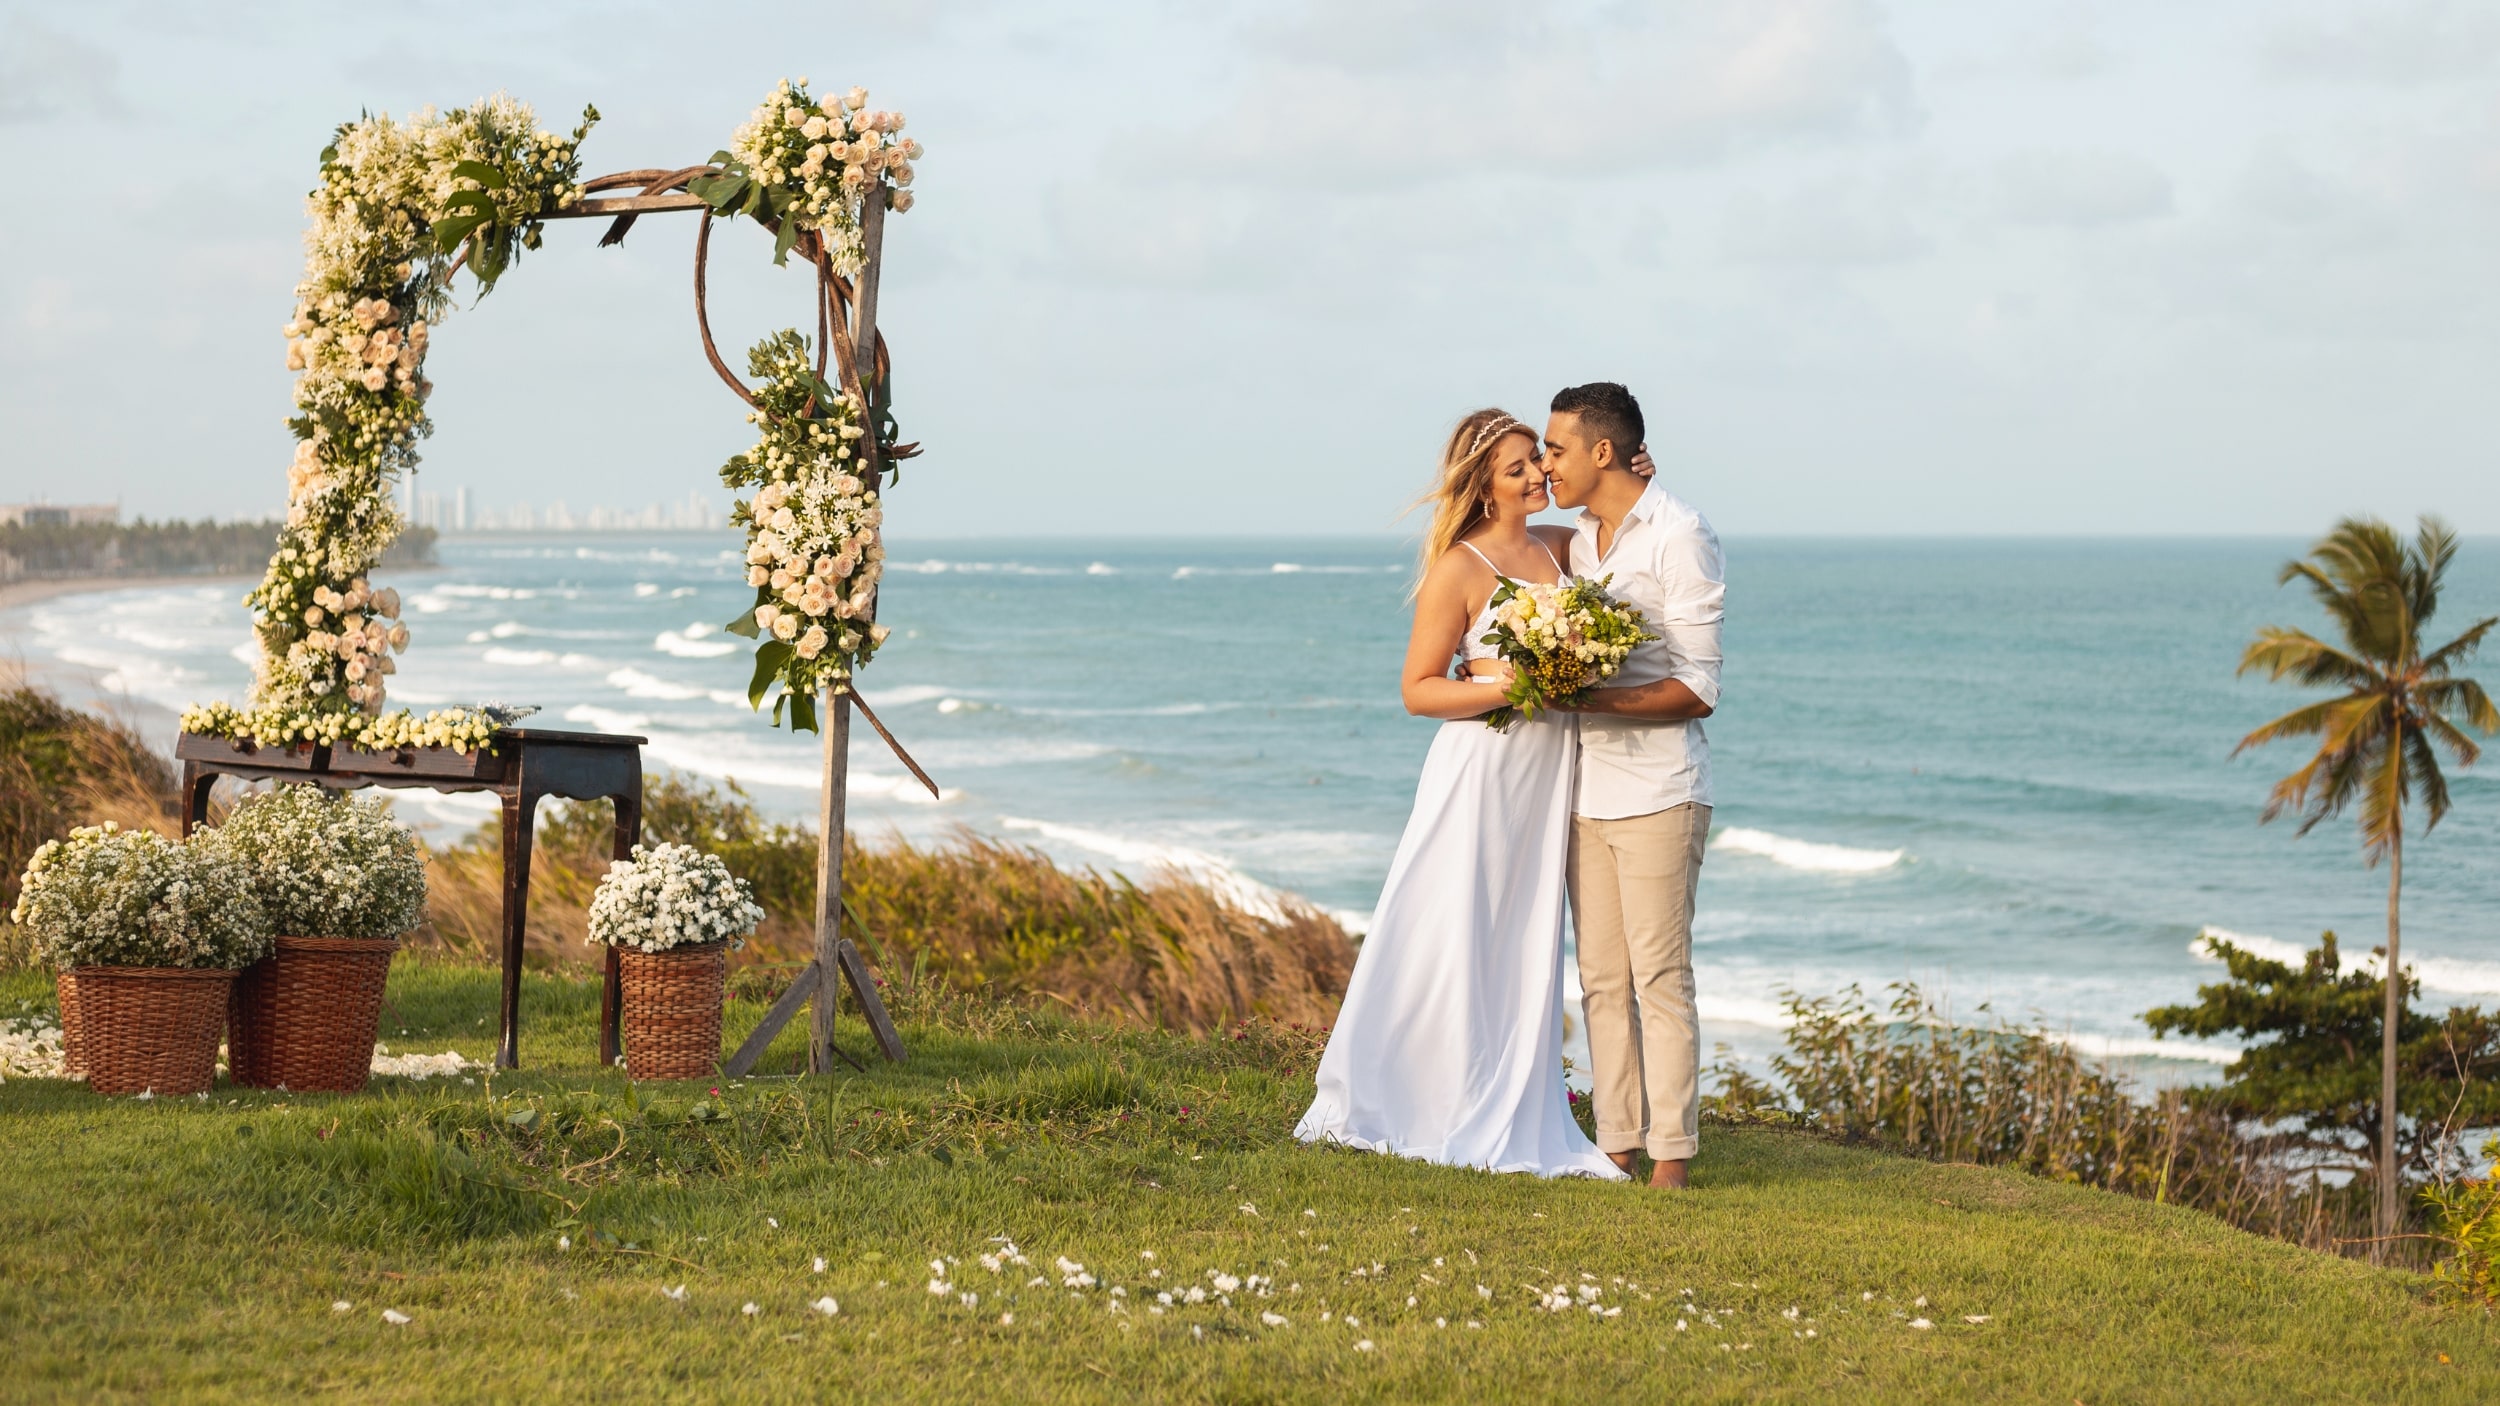 Why You Should Have a Destination Wedding